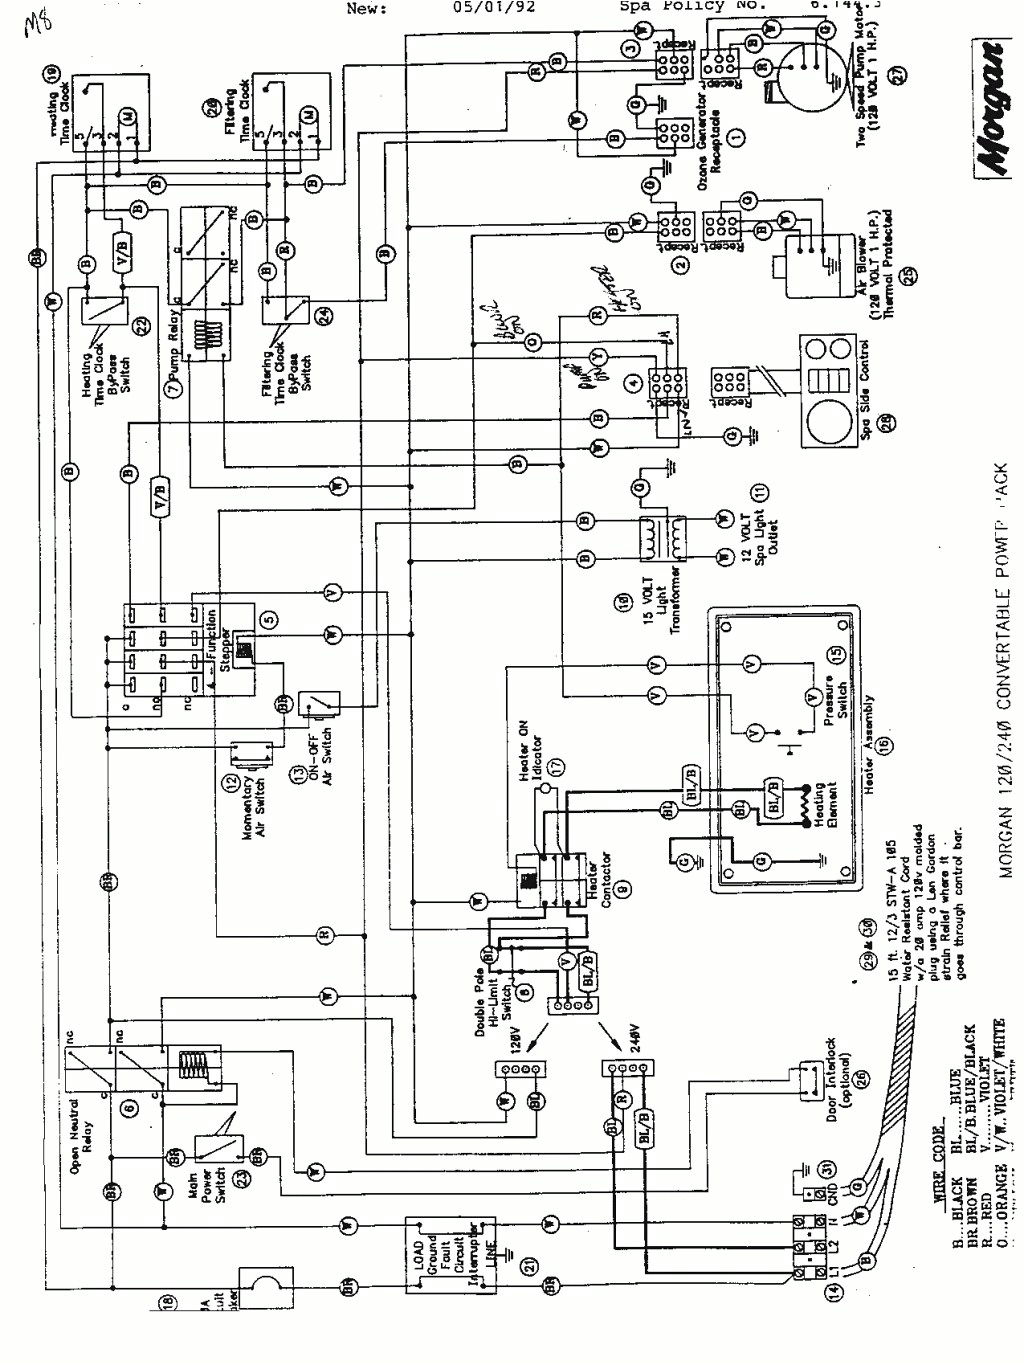 cal spa wiring diagram hot tub wire diagram jacuzzi wiring periodic diagrams science gif